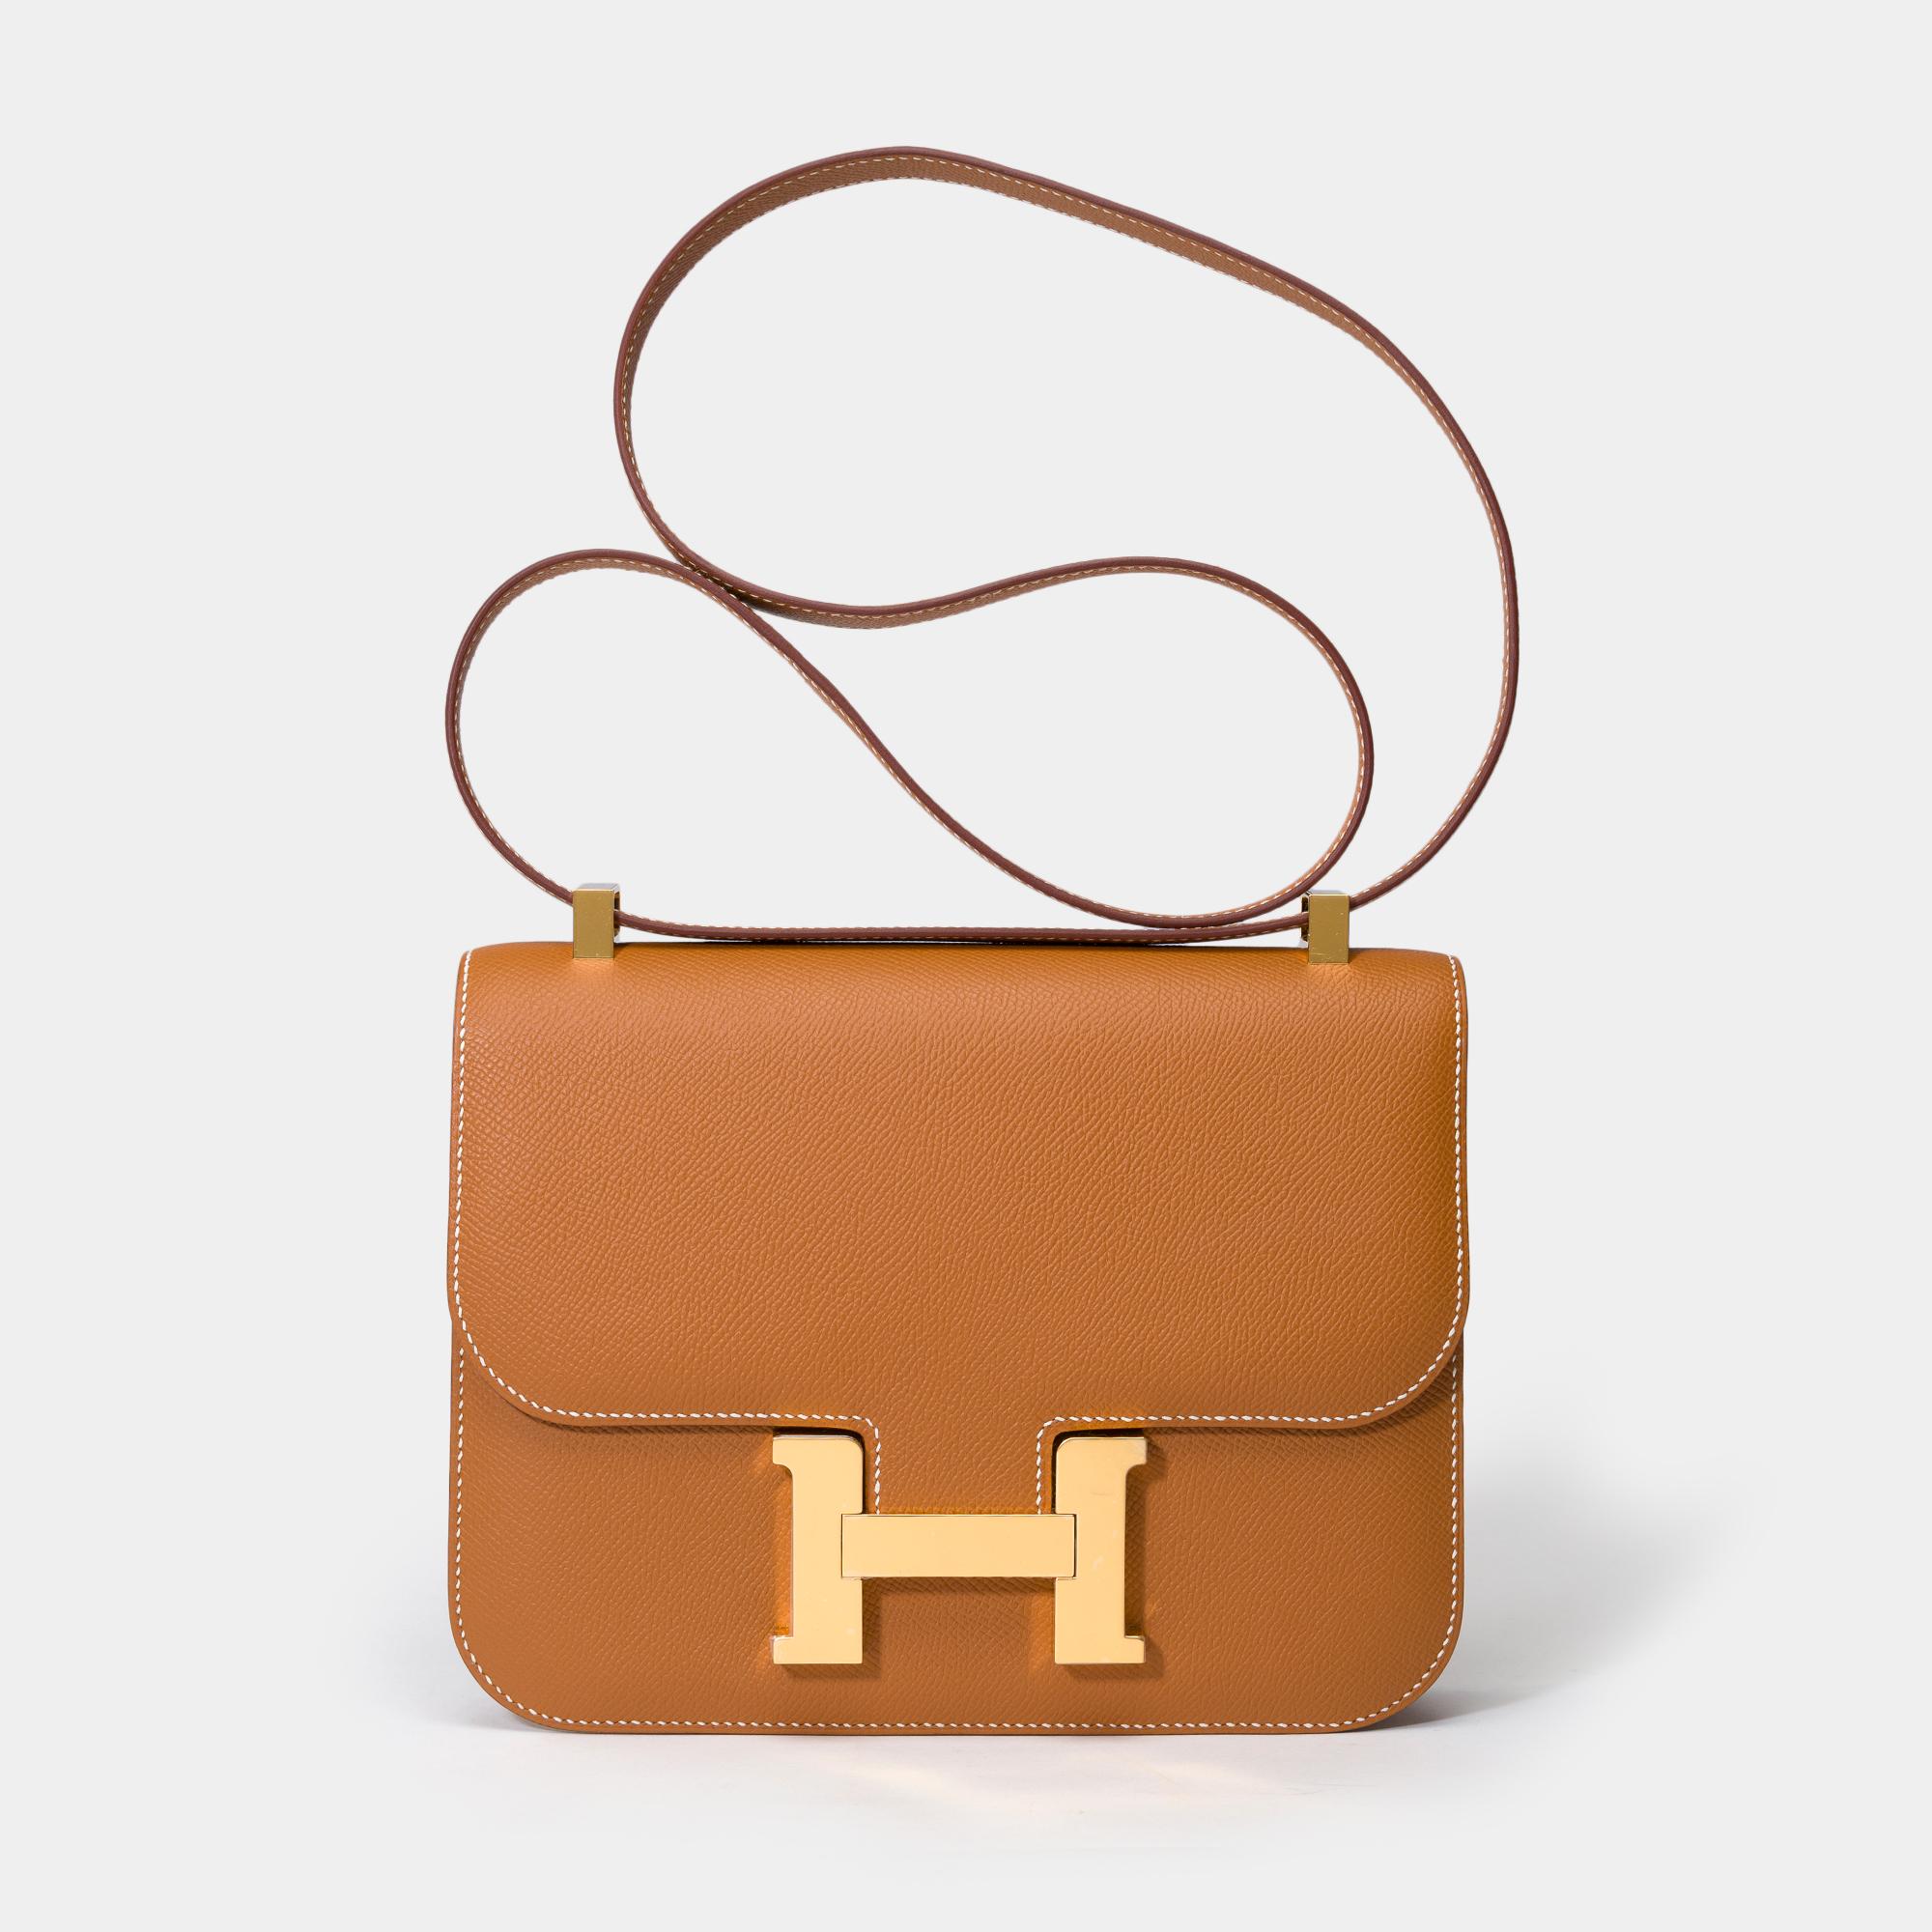 Amazing Hermès Constance 23 shoulder bag in Epsom Gold Calf, gold plated metal trim, a shoulder strap in epsom gold leather allowing a shoulder or crossbody carry

Logo closure on flap
Gold leather lining, two compartments, one patch